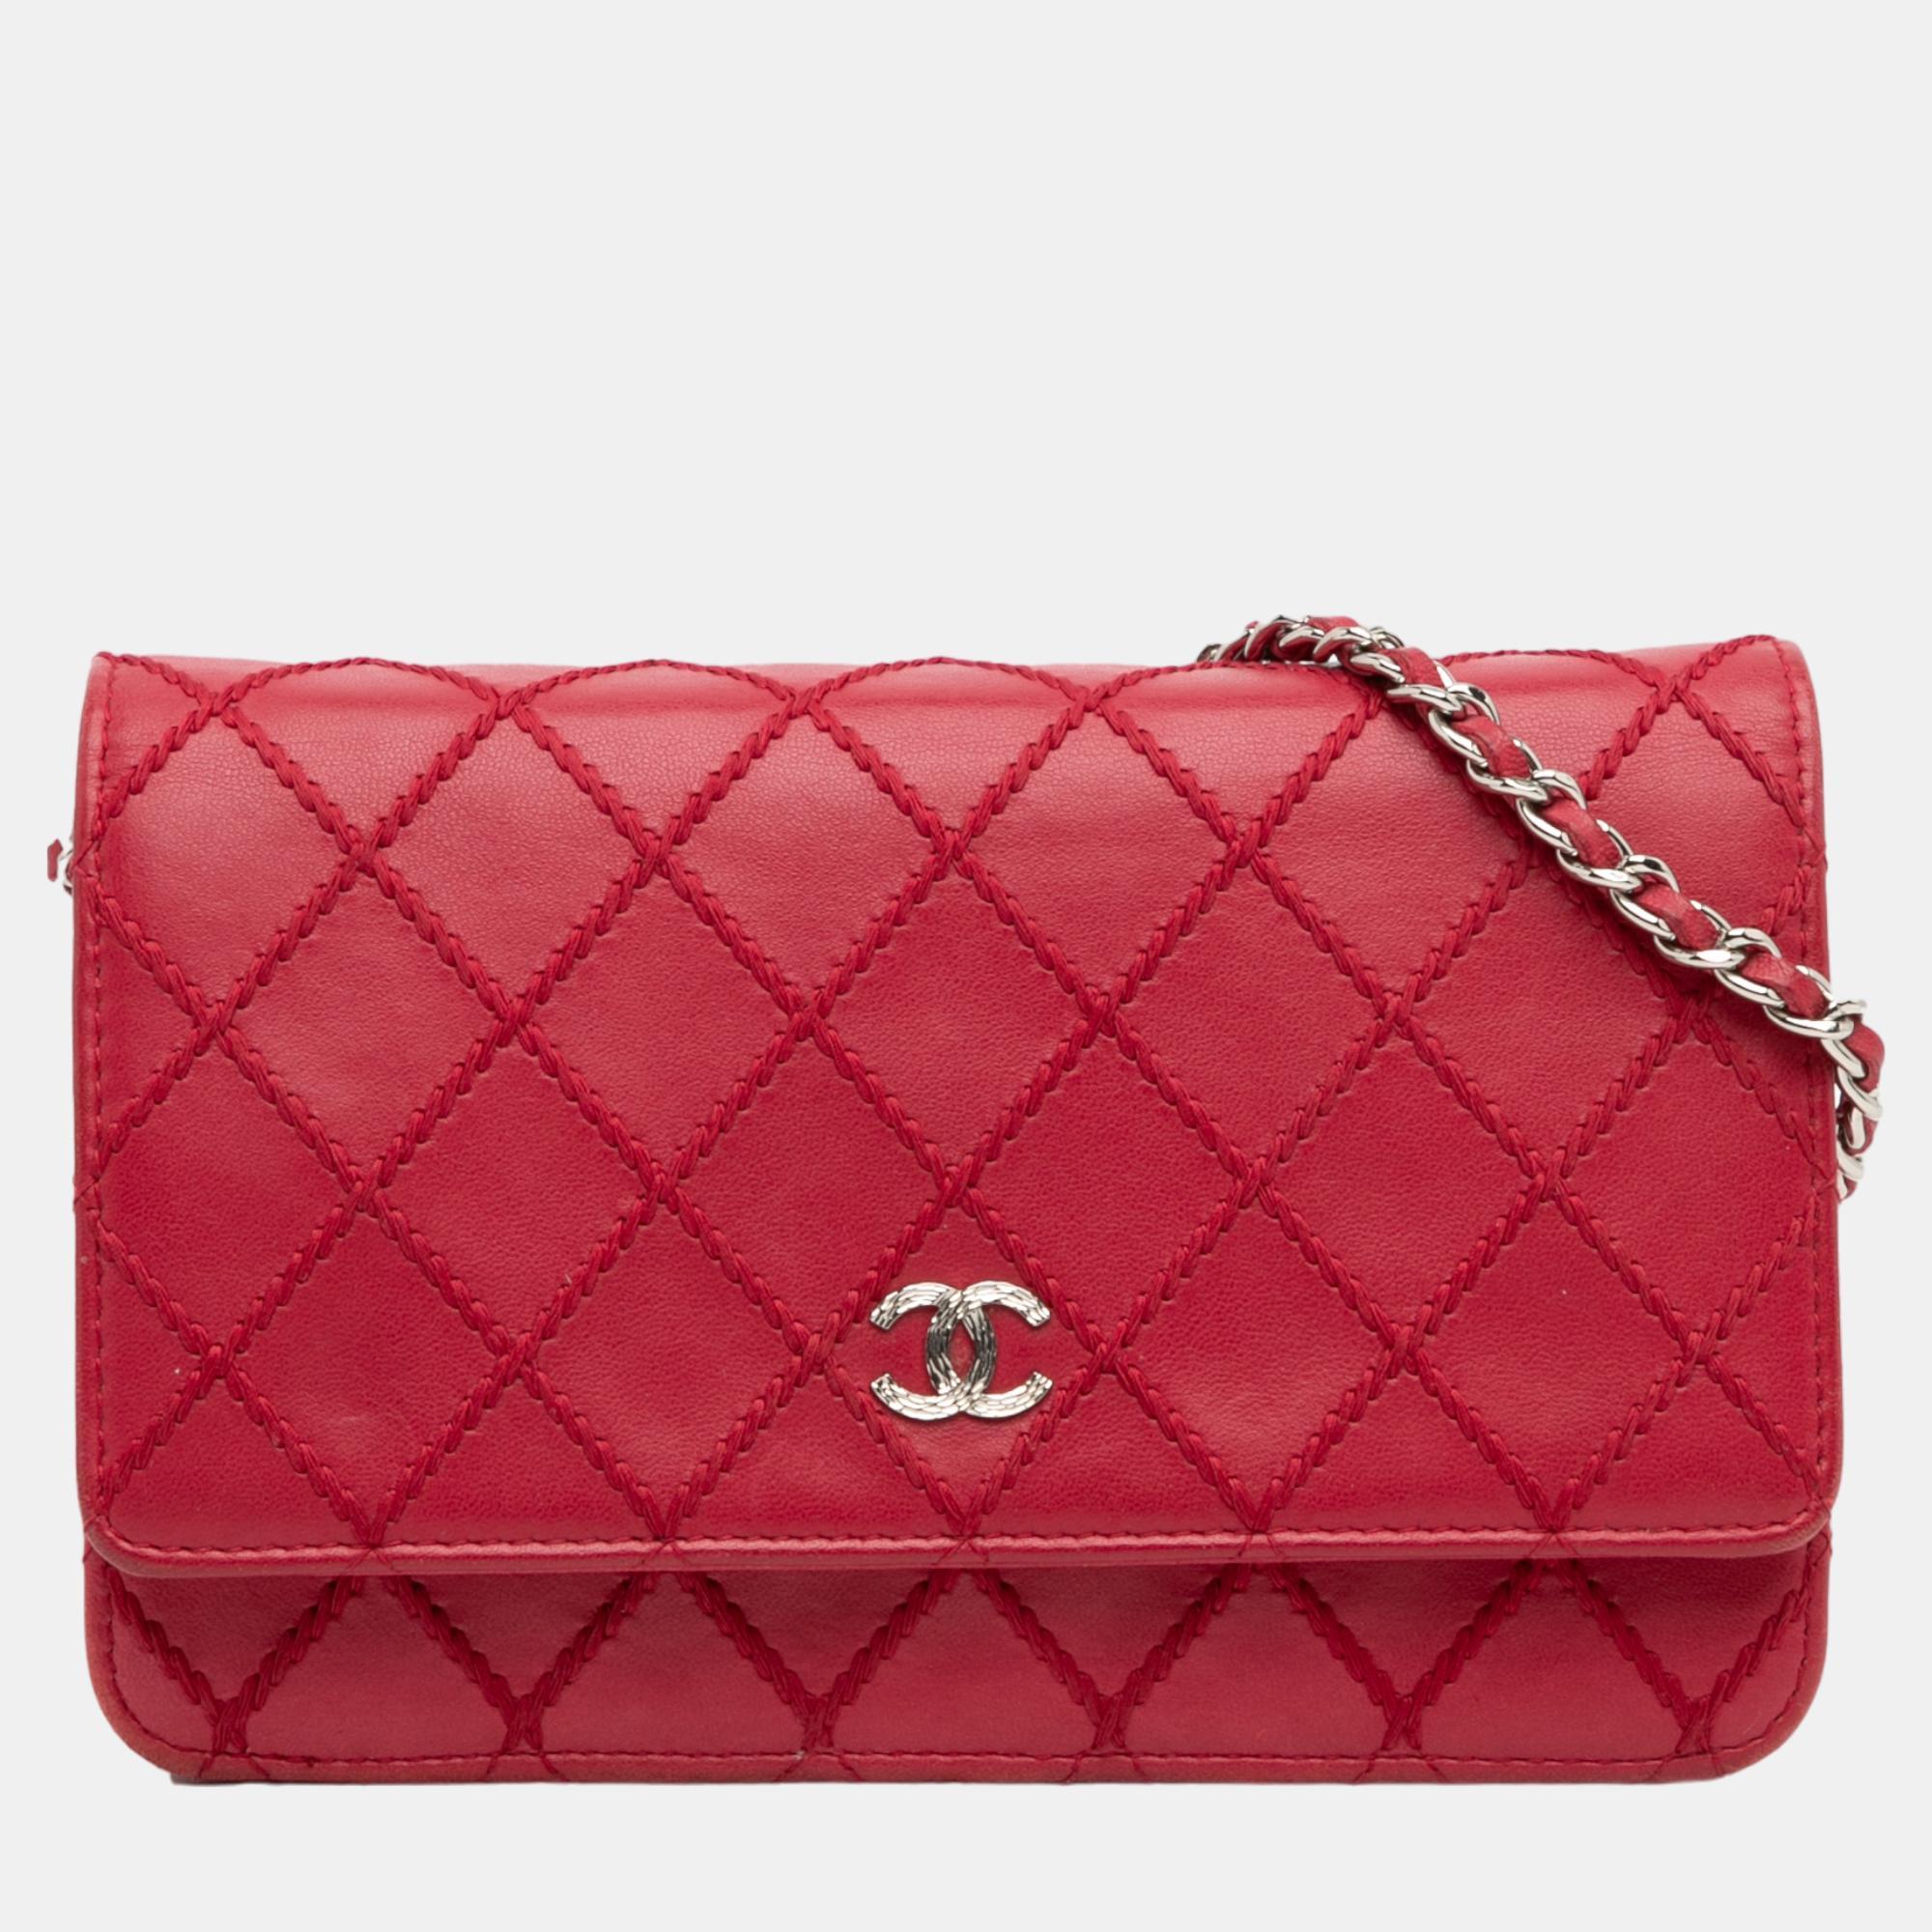 Pre-owned Chanel Red Cc Lambskin Wild Stitch Wallet On Chain